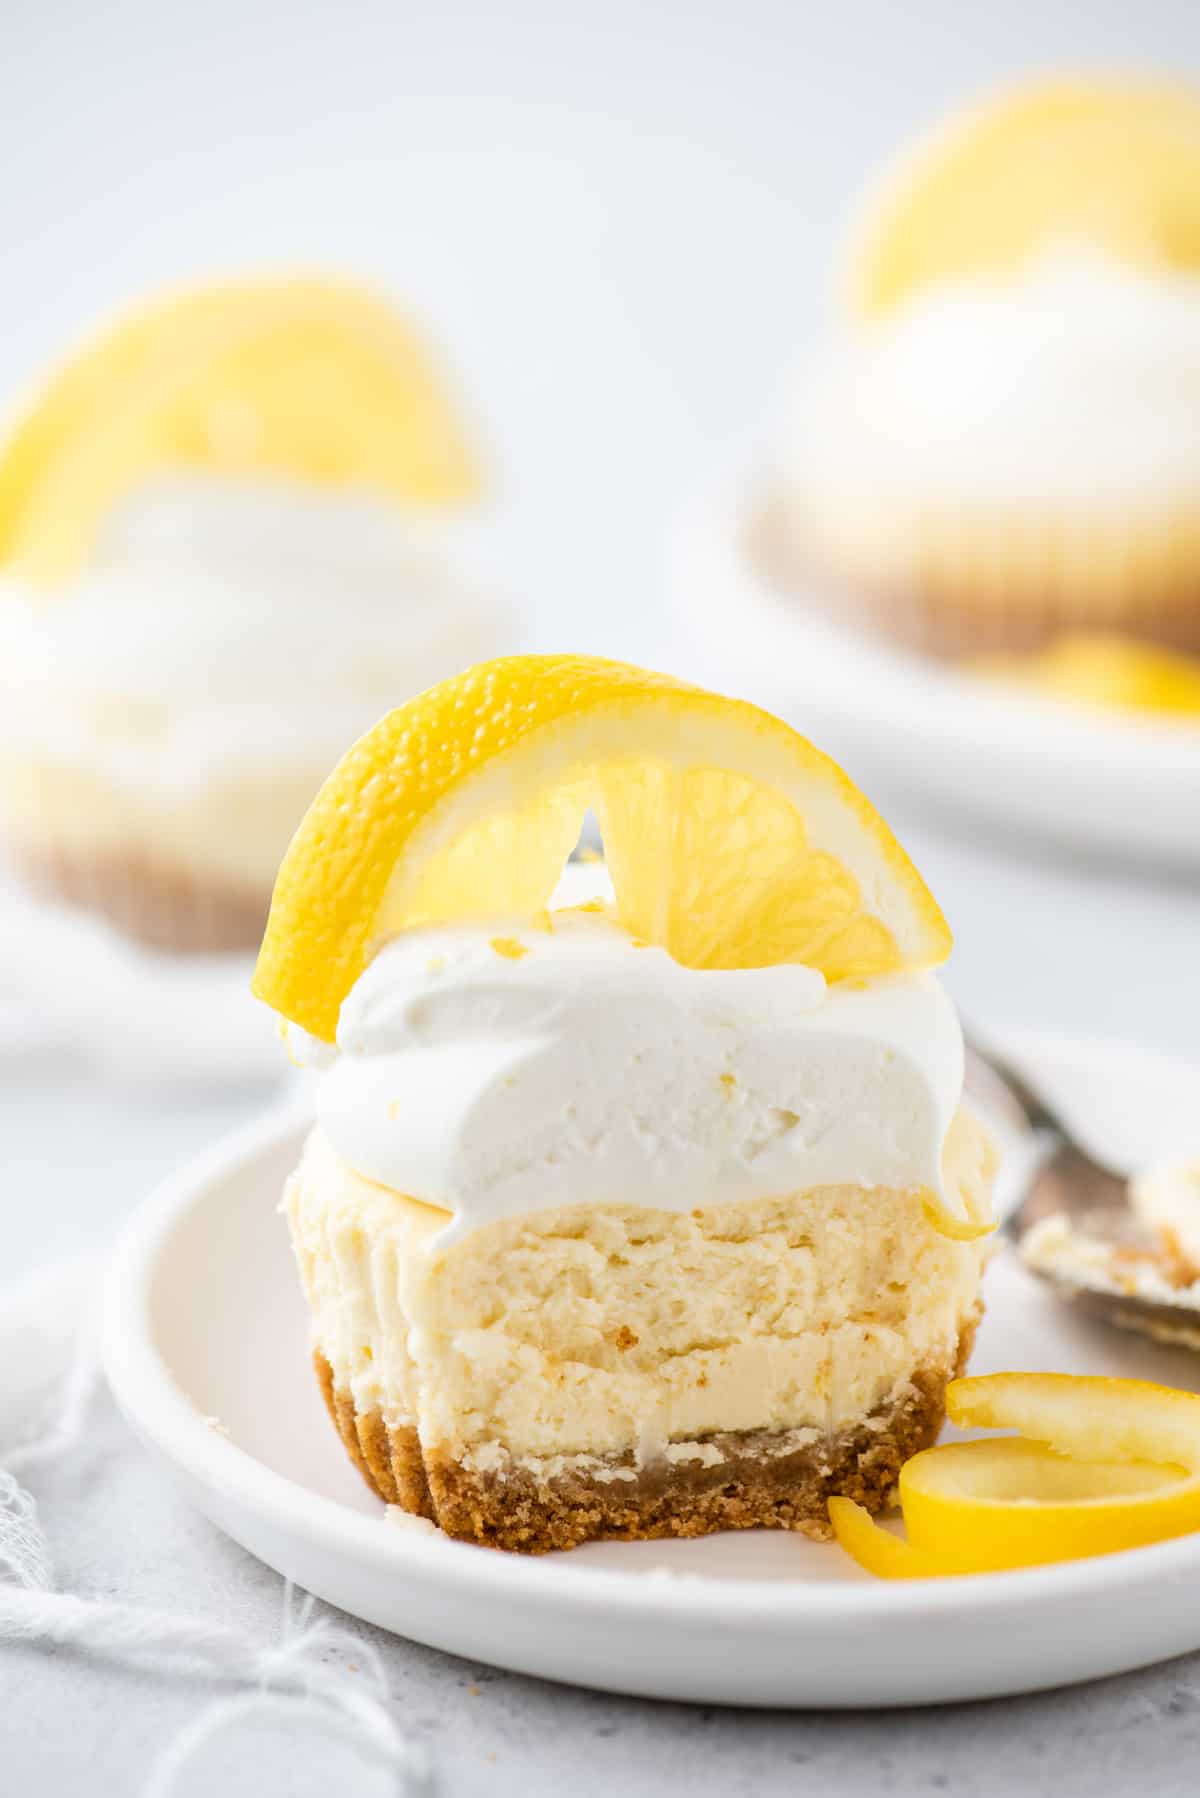 Mini lemon cheesecake topped with whipped cream and lemon slice with bite removed on white plate